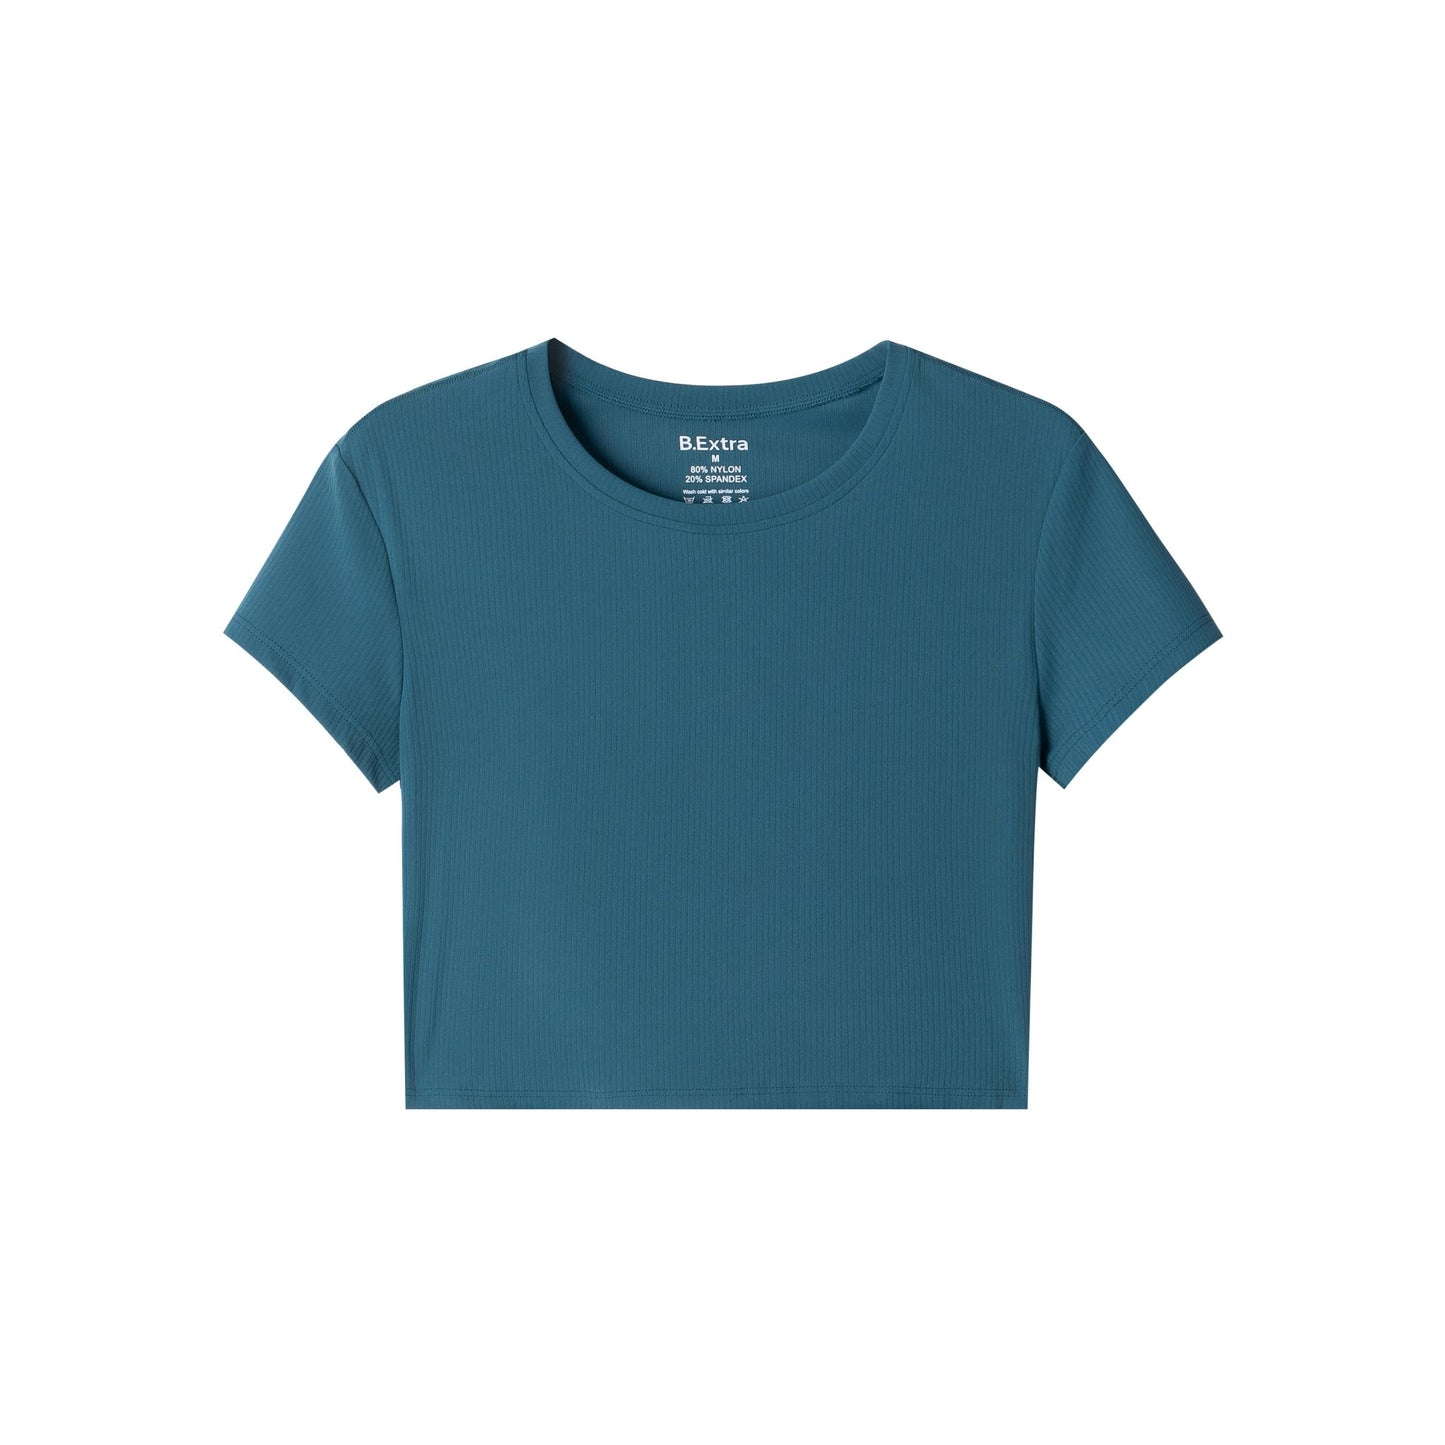 Cropped Fit Tee - Green Marine